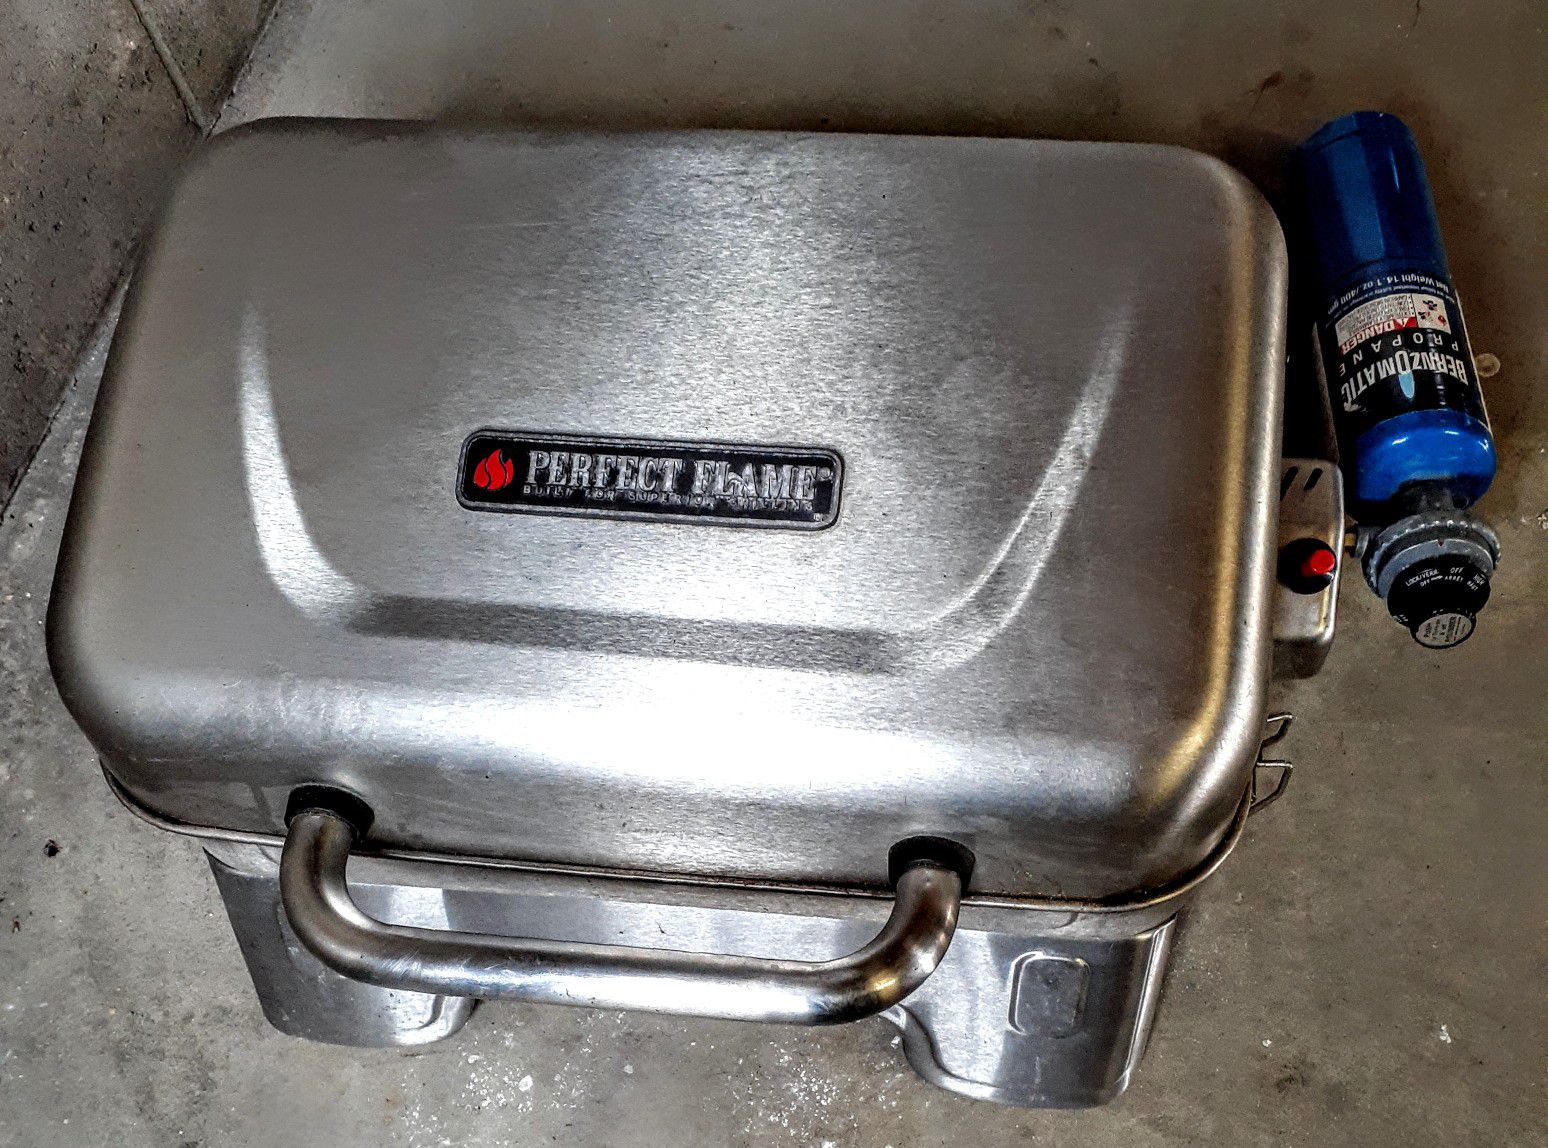 Perfect Flame stainless grill.